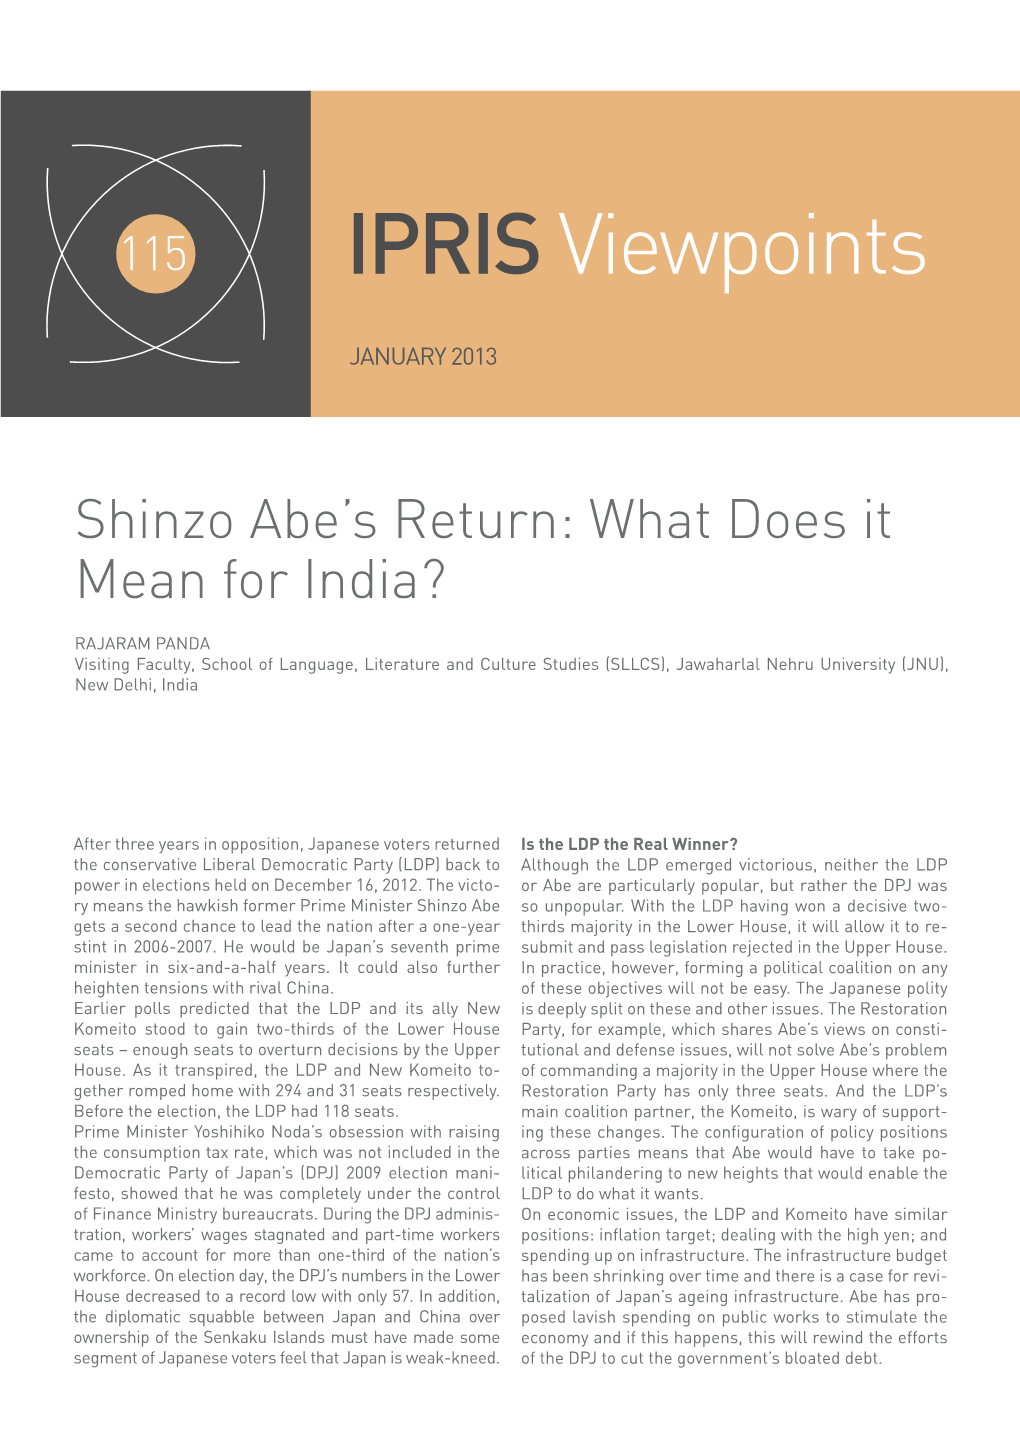 Iprisviewpoints